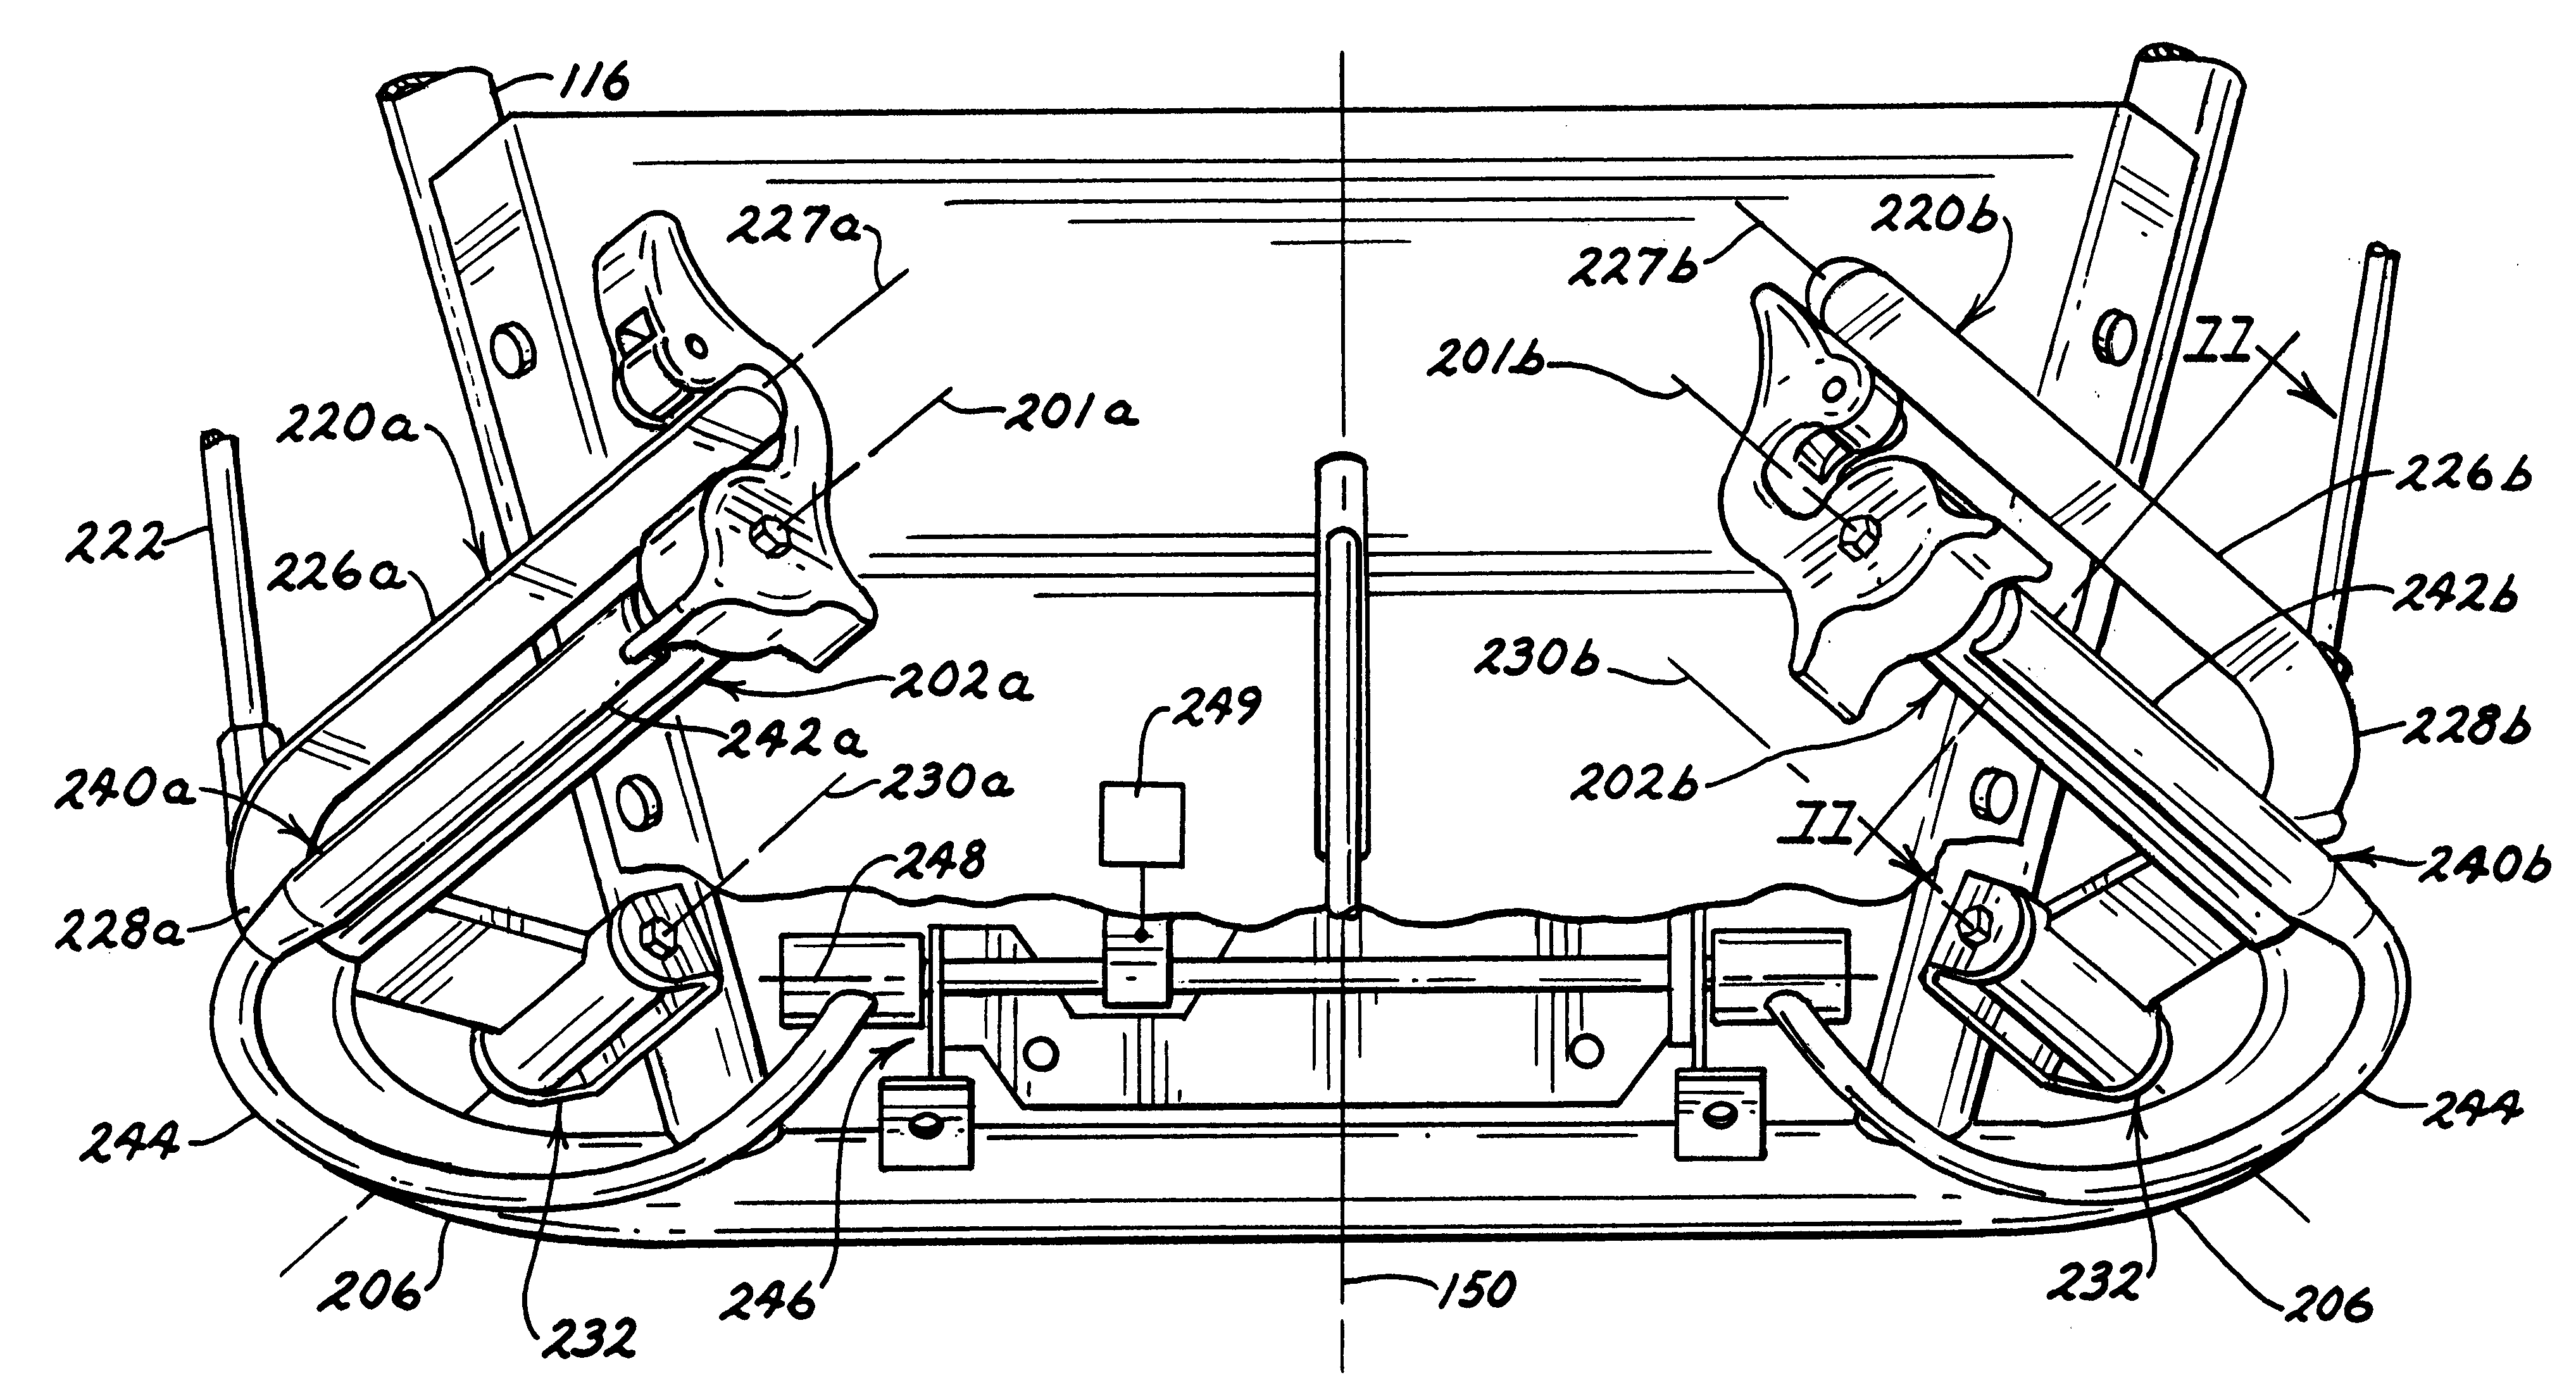 Operator control system for self-propelled vehicles